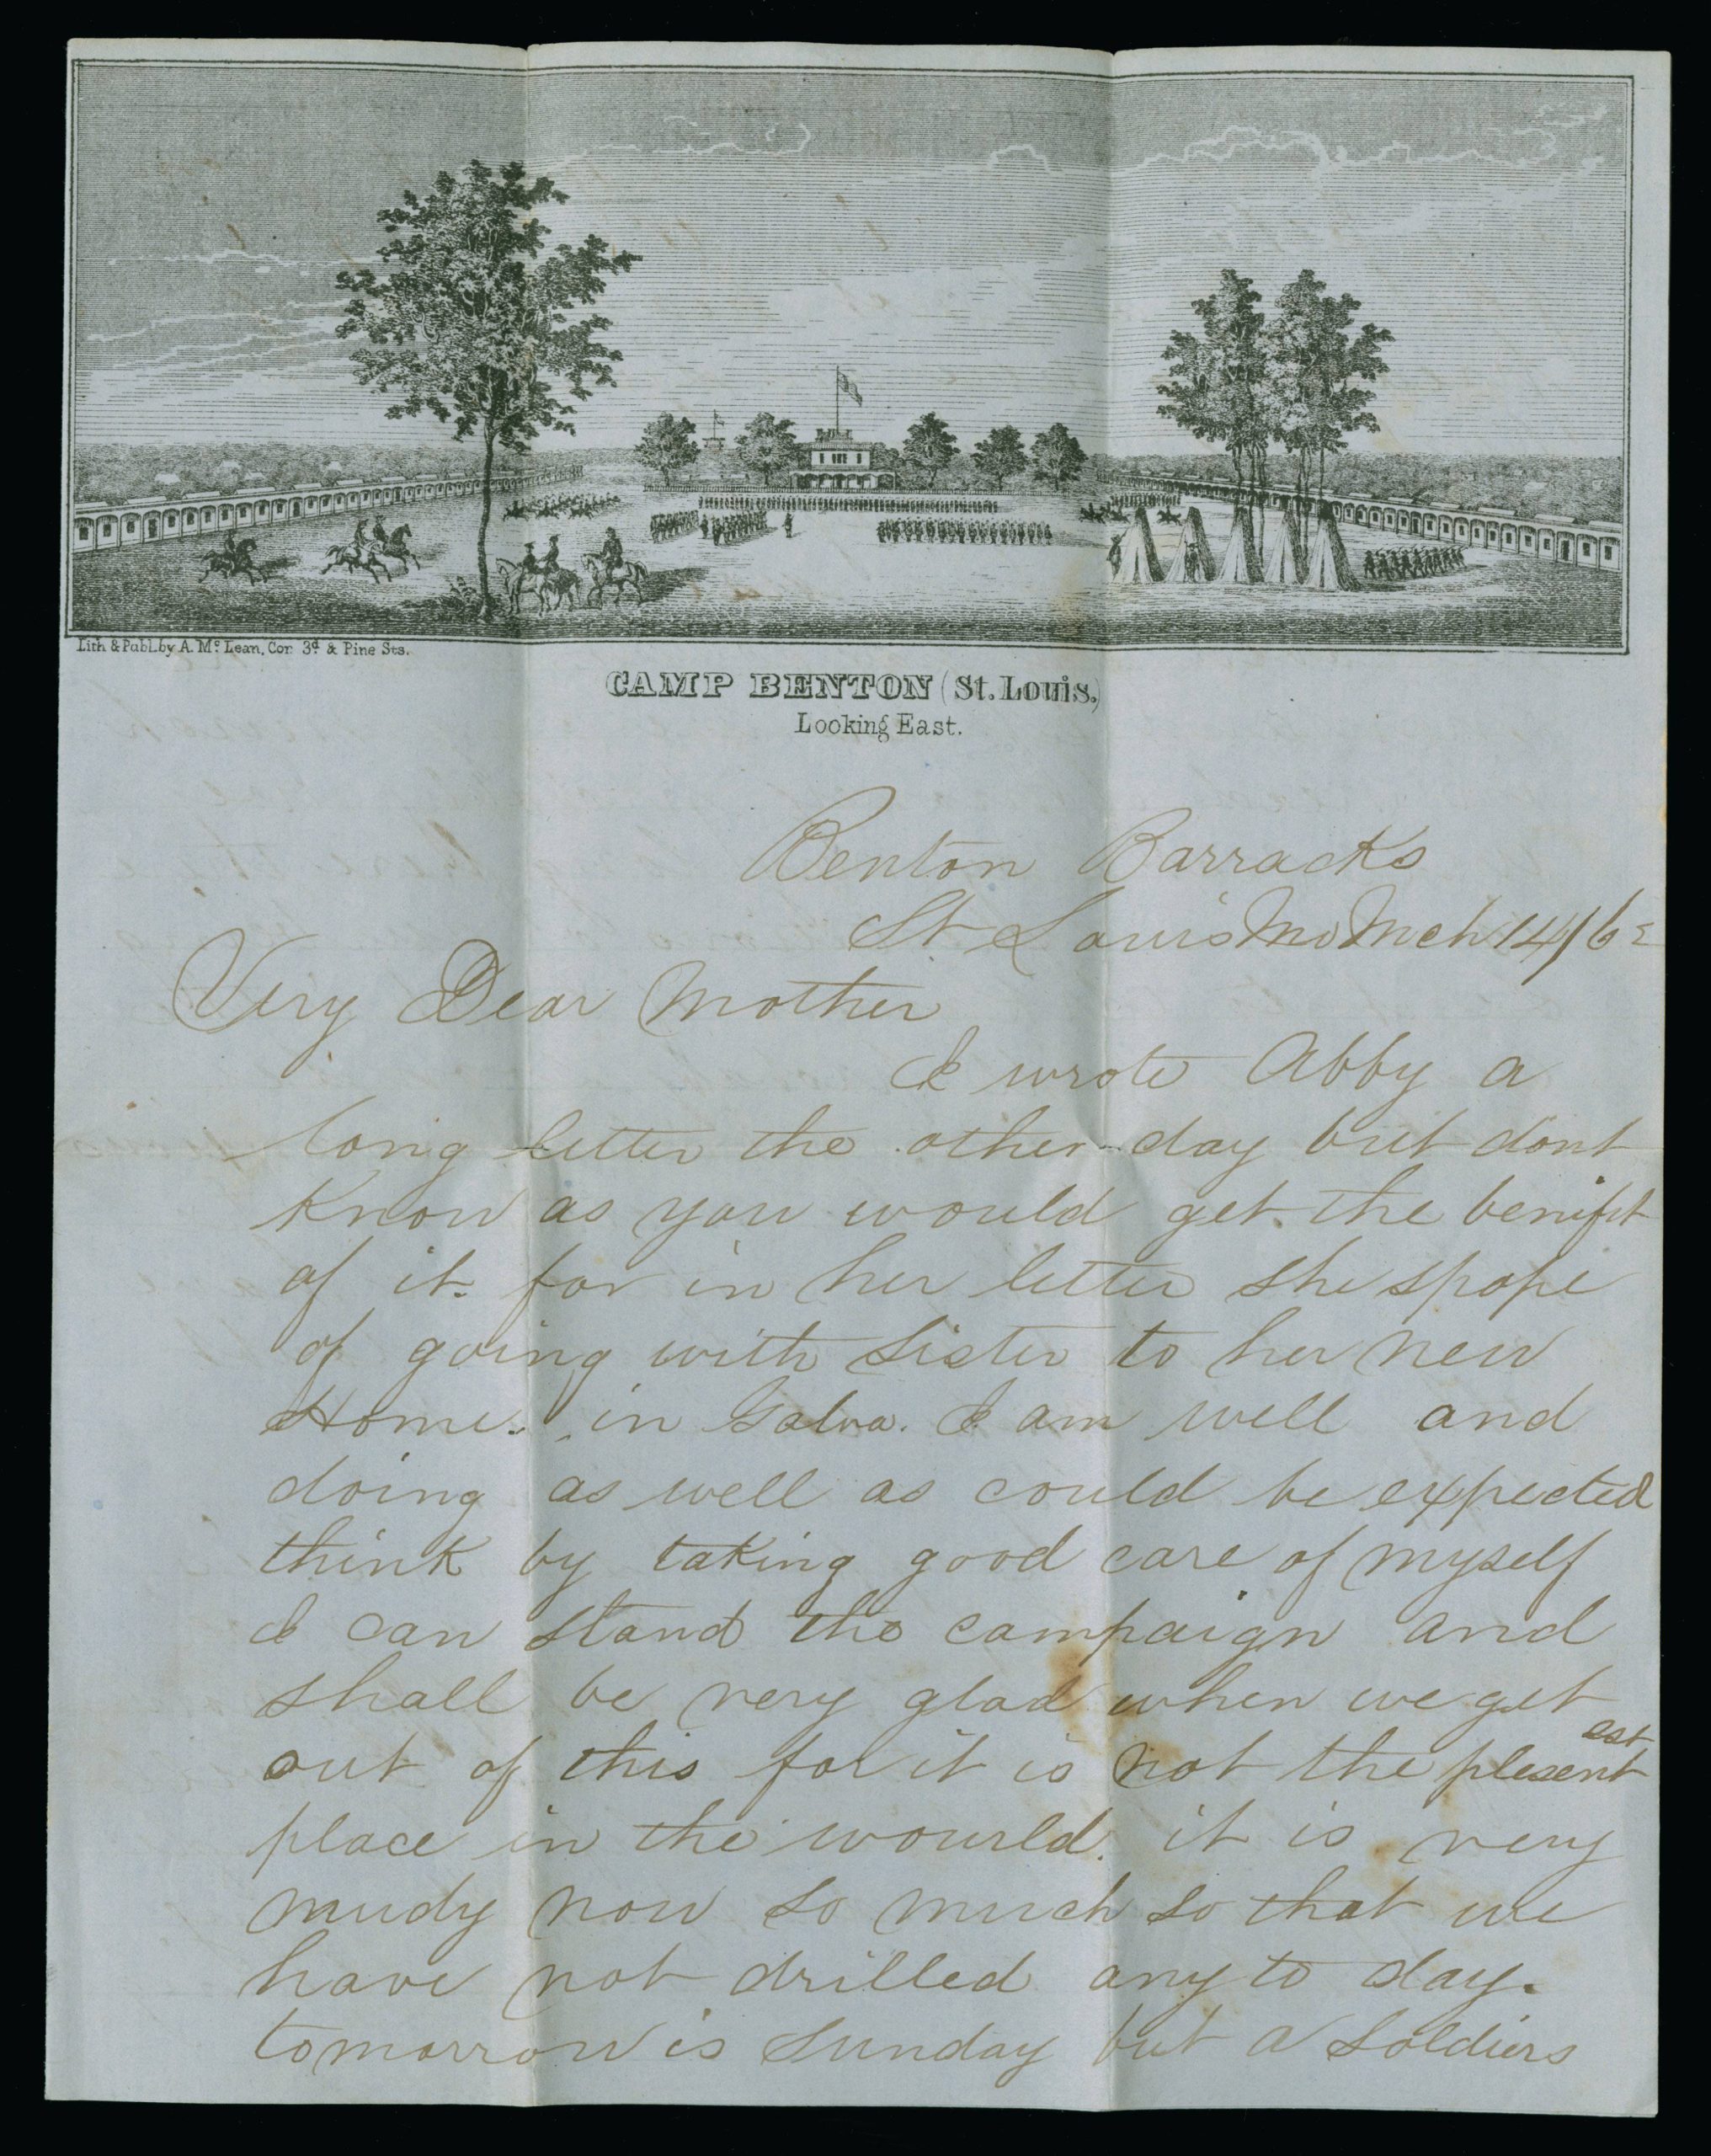 Single column of handwritten cursive text in brown ink on blue paper. At the top is a print from an engraving of an army training camp with soldiers in formation.